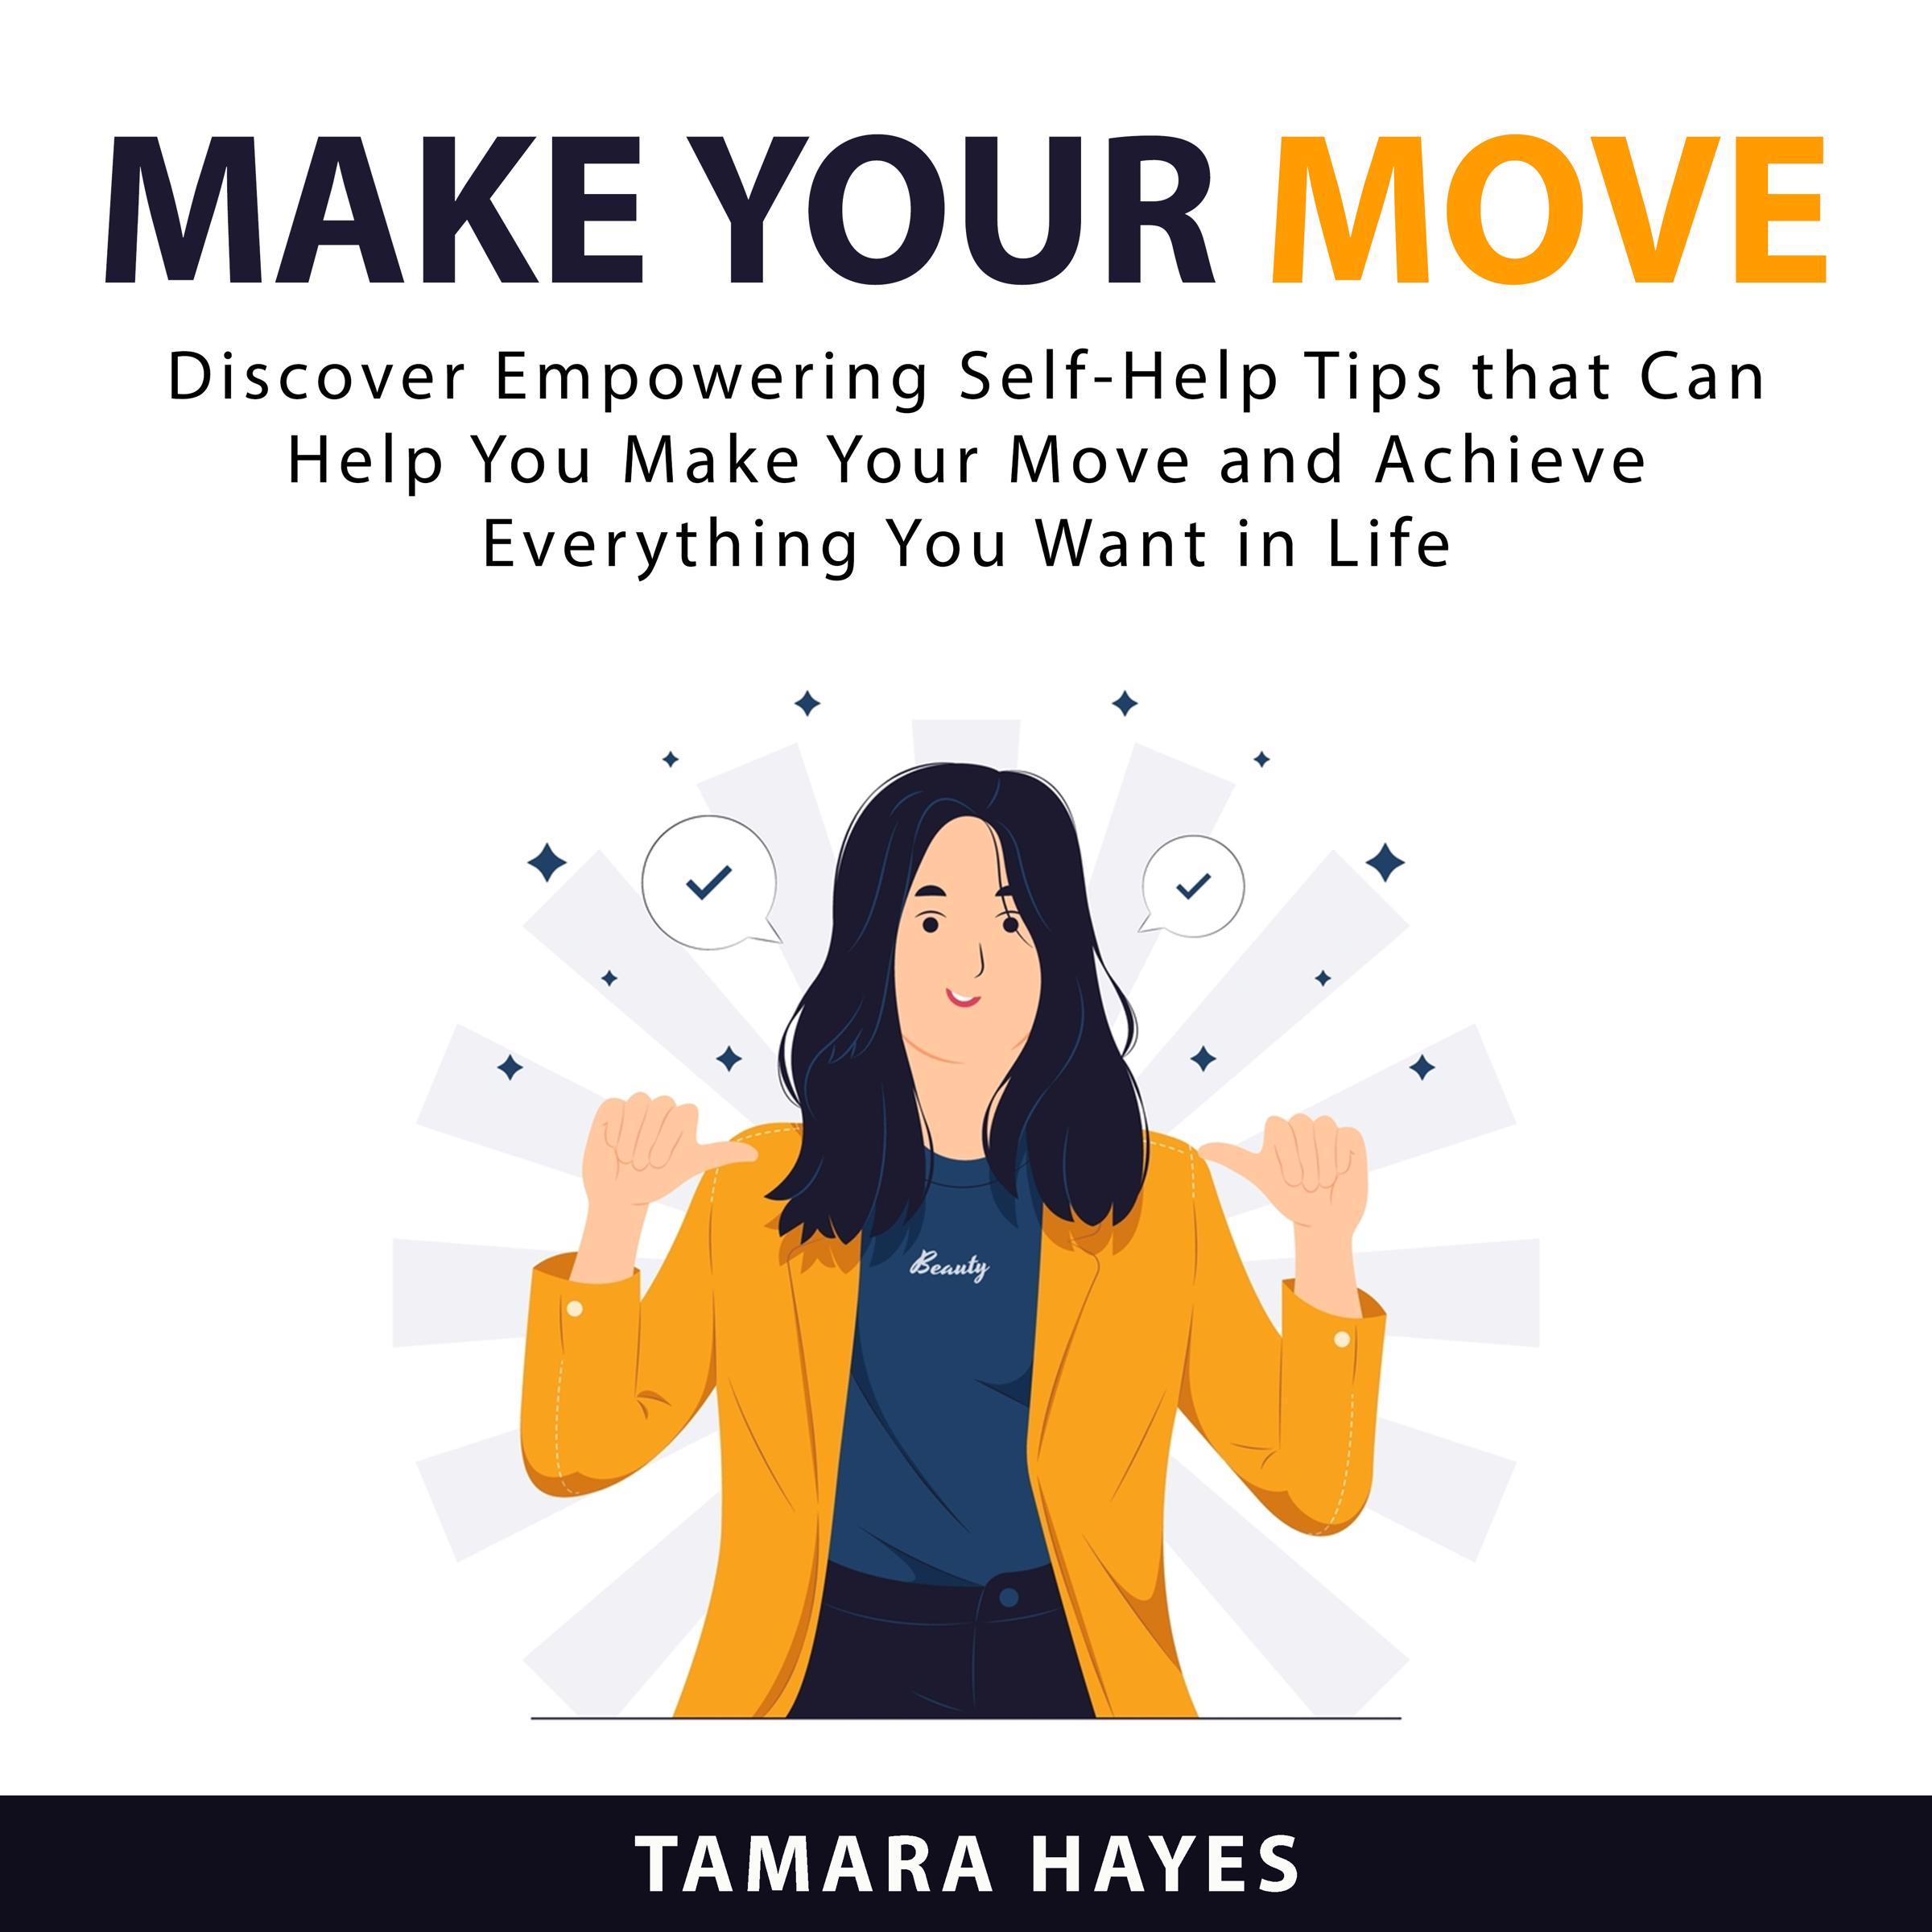 Make Your Move: Discover Empowering Self-Help Tips that Can Help You Make Your Move and Achieve Everything You Want in Life